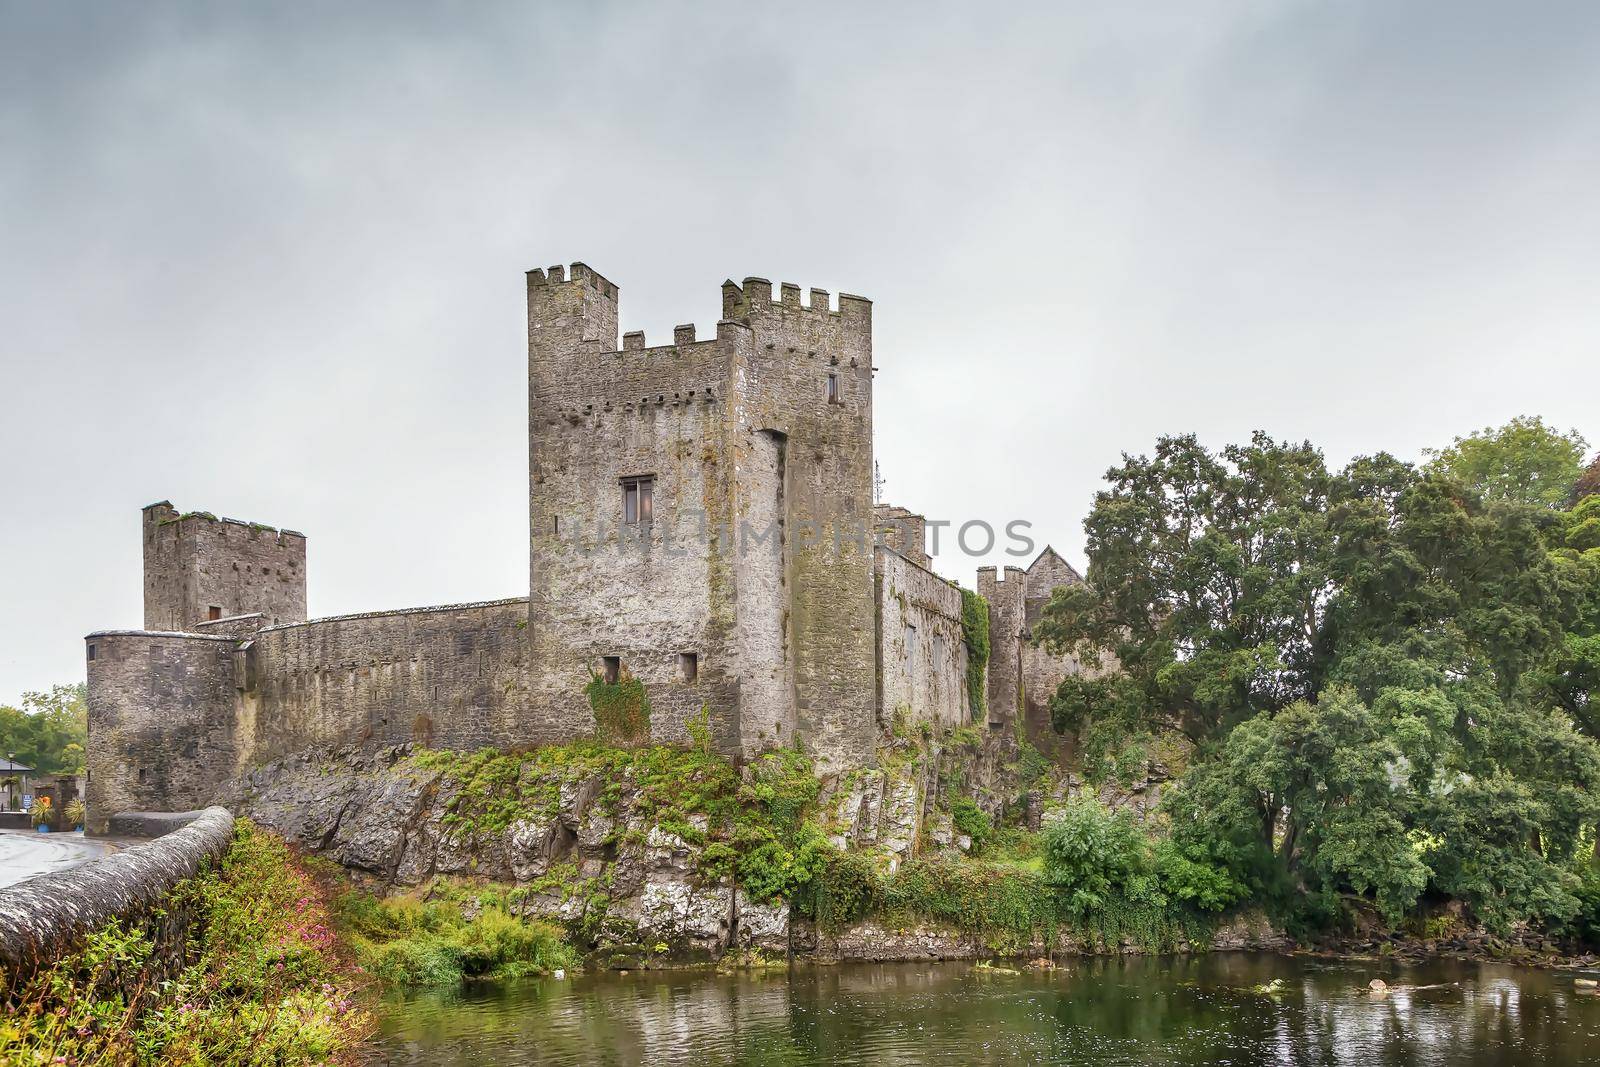 Cahir Castle is one of the largest castles in Ireland, is sited on an island in the river Suir. It was built from 1142